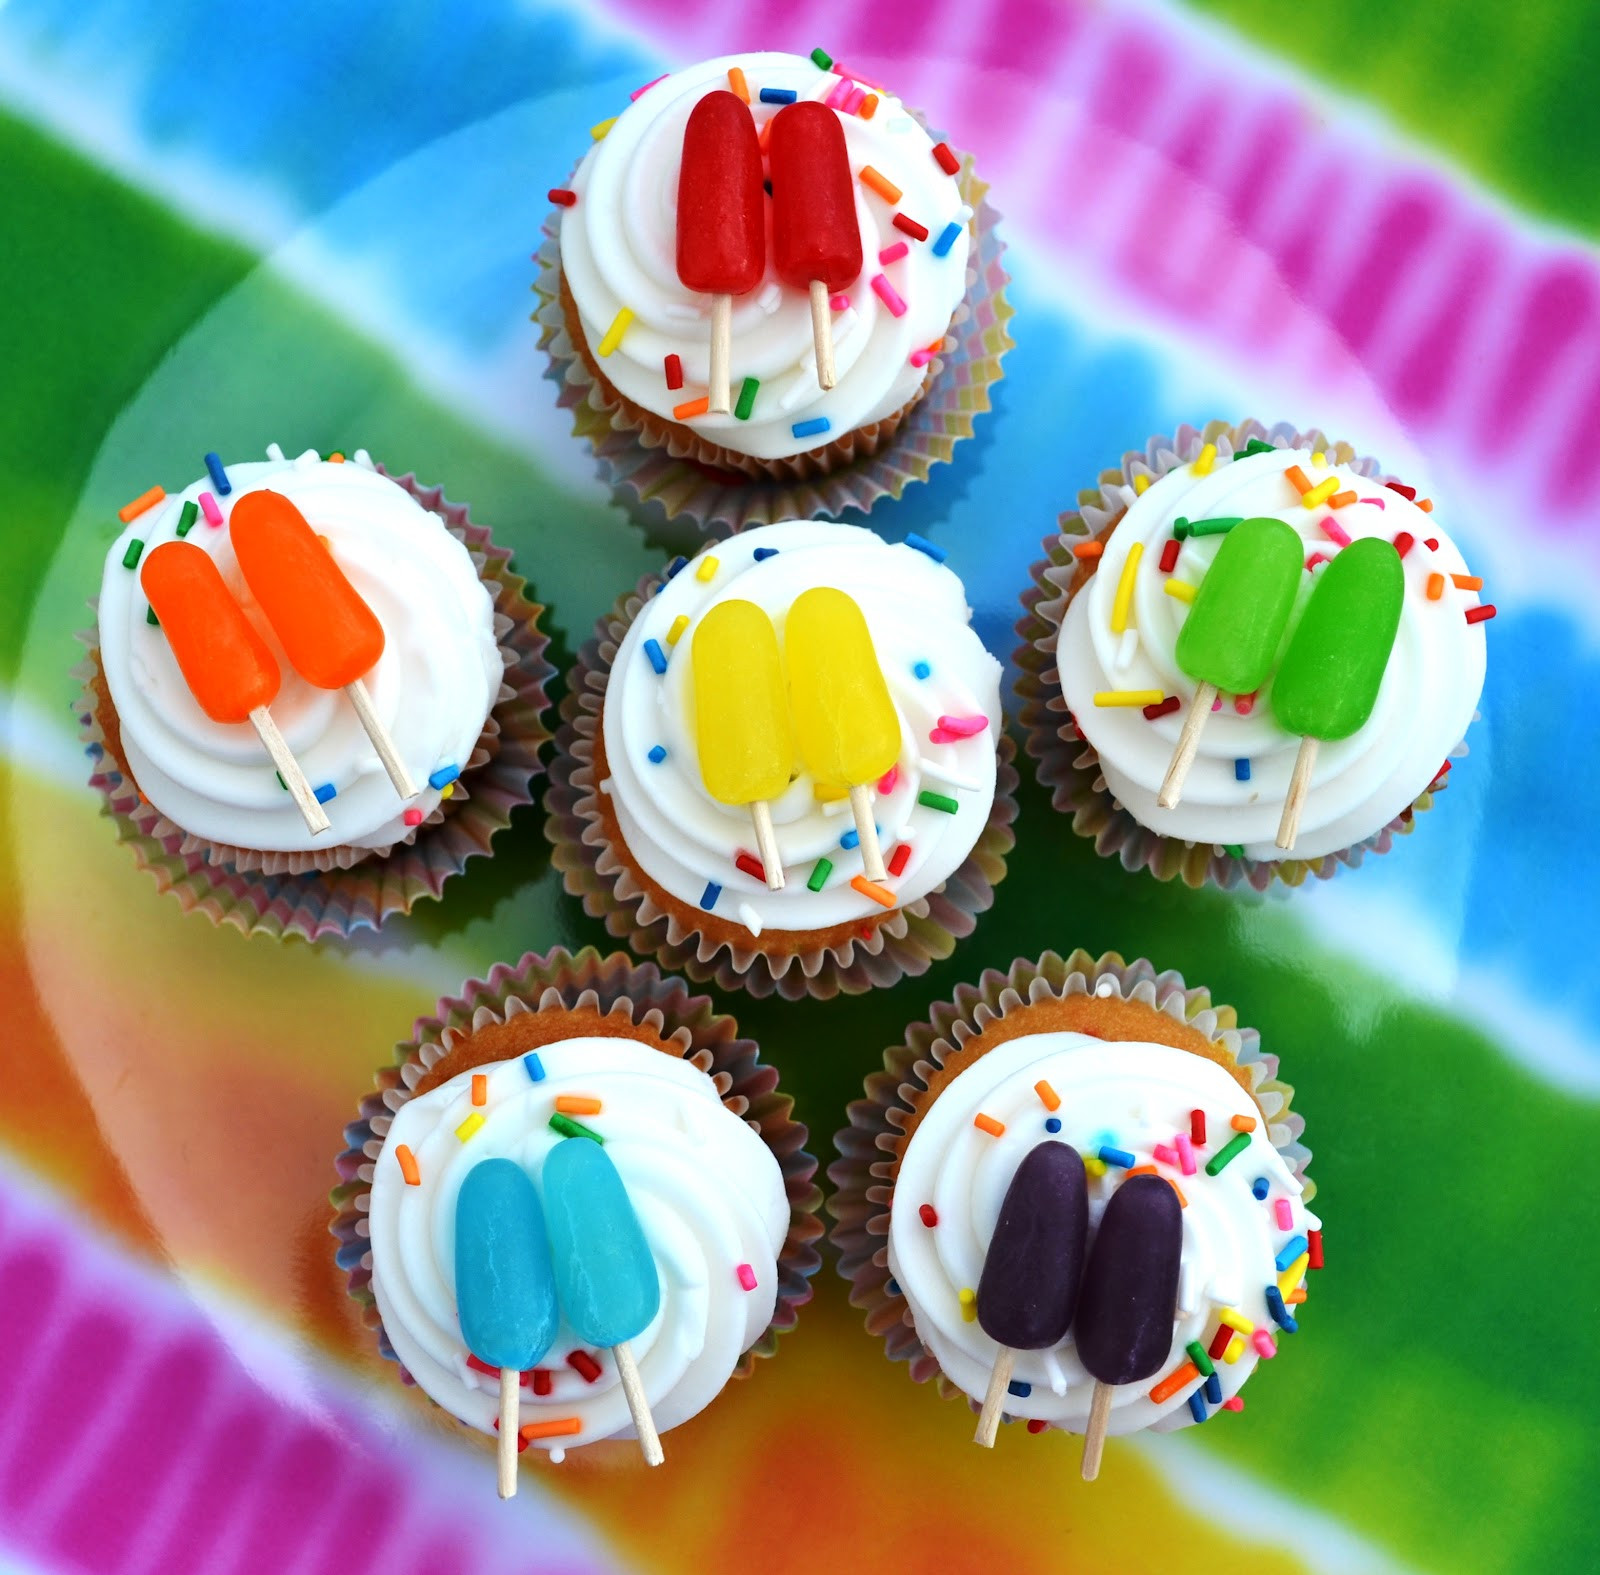 Easy Cupcake Decorating Ideas For Summer
 Sweetology Mini Popsicle Mini Cupcakes